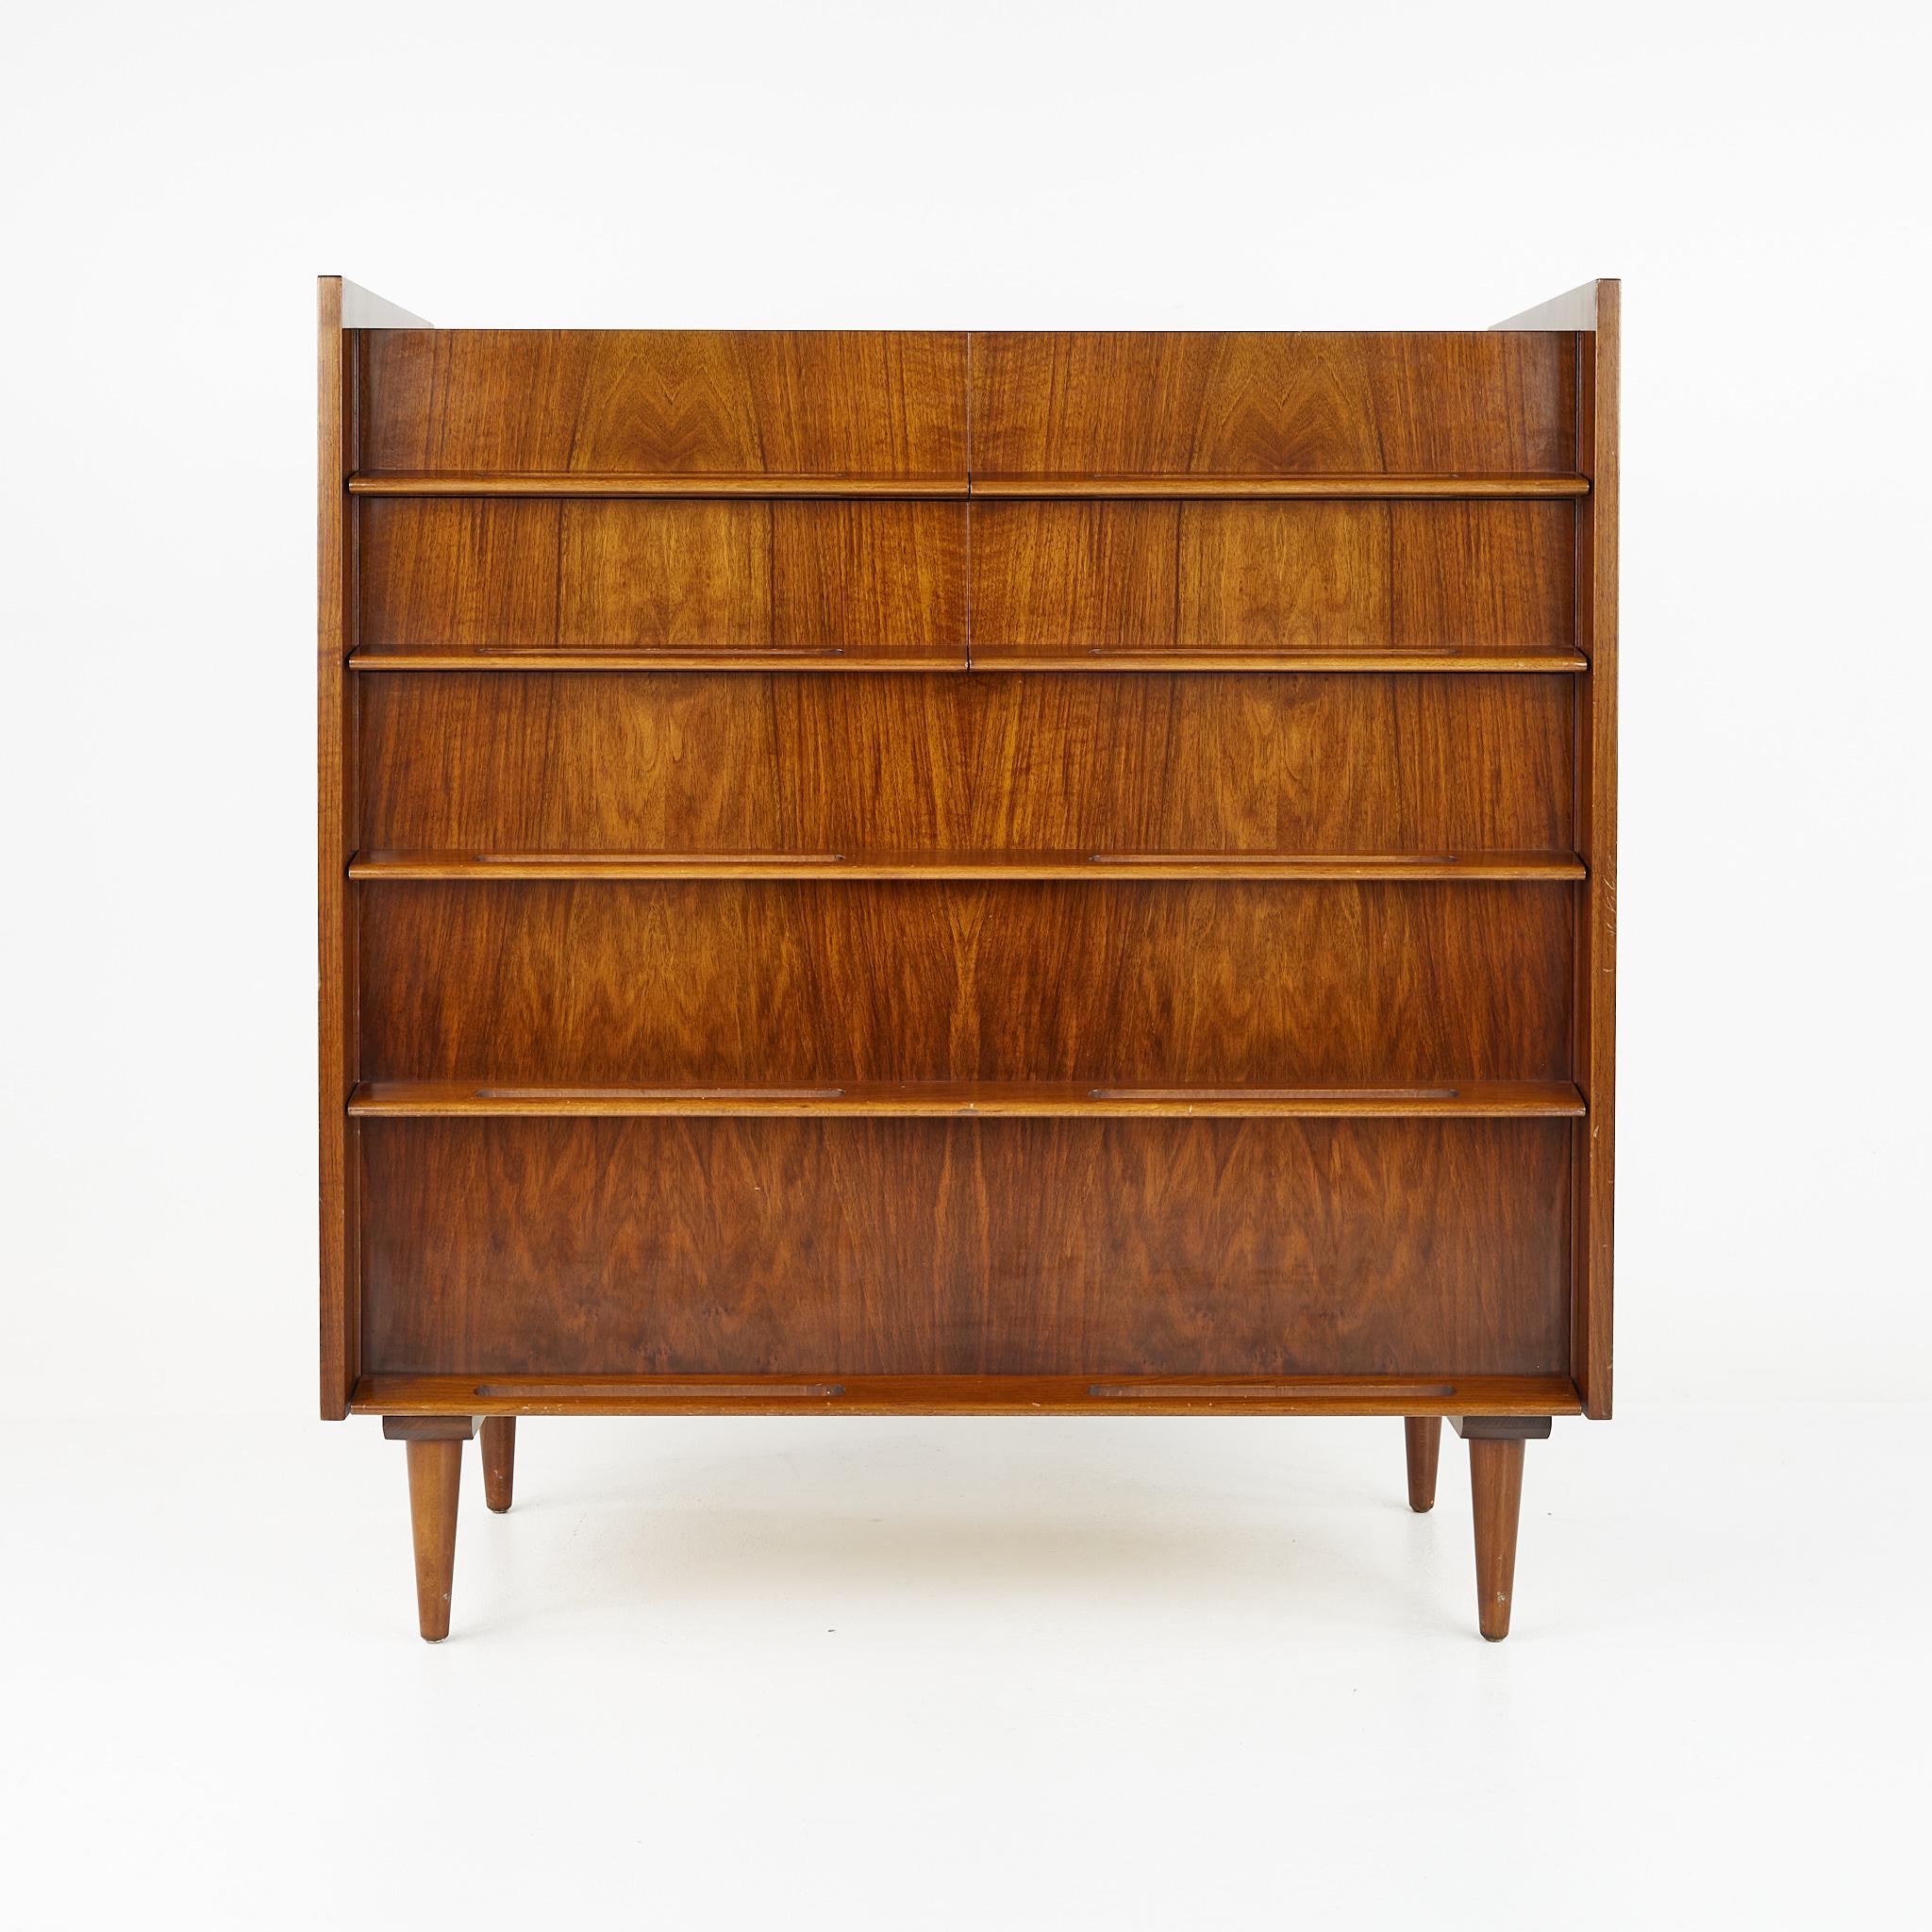 Edmund Spence coronation mid century walnut highboy dresser

This dresser measures: 42 wide x 18 deep x 45 inches high

?All pieces of furniture can be had in what we call restored vintage condition. That means the piece is restored upon